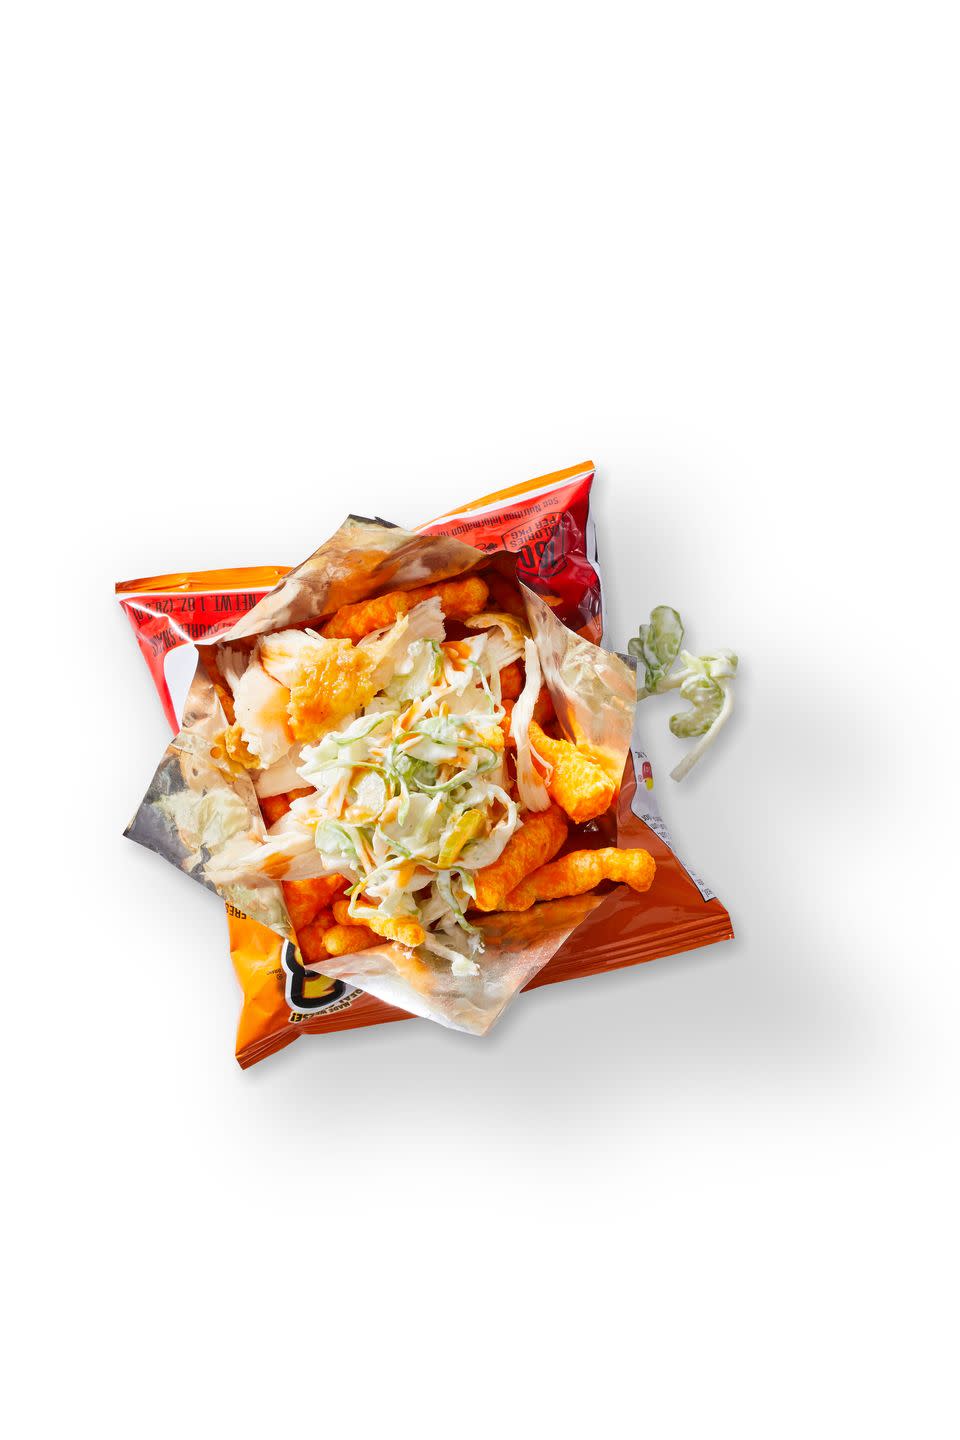 Red Hot and Blue Chicken Snack Bag